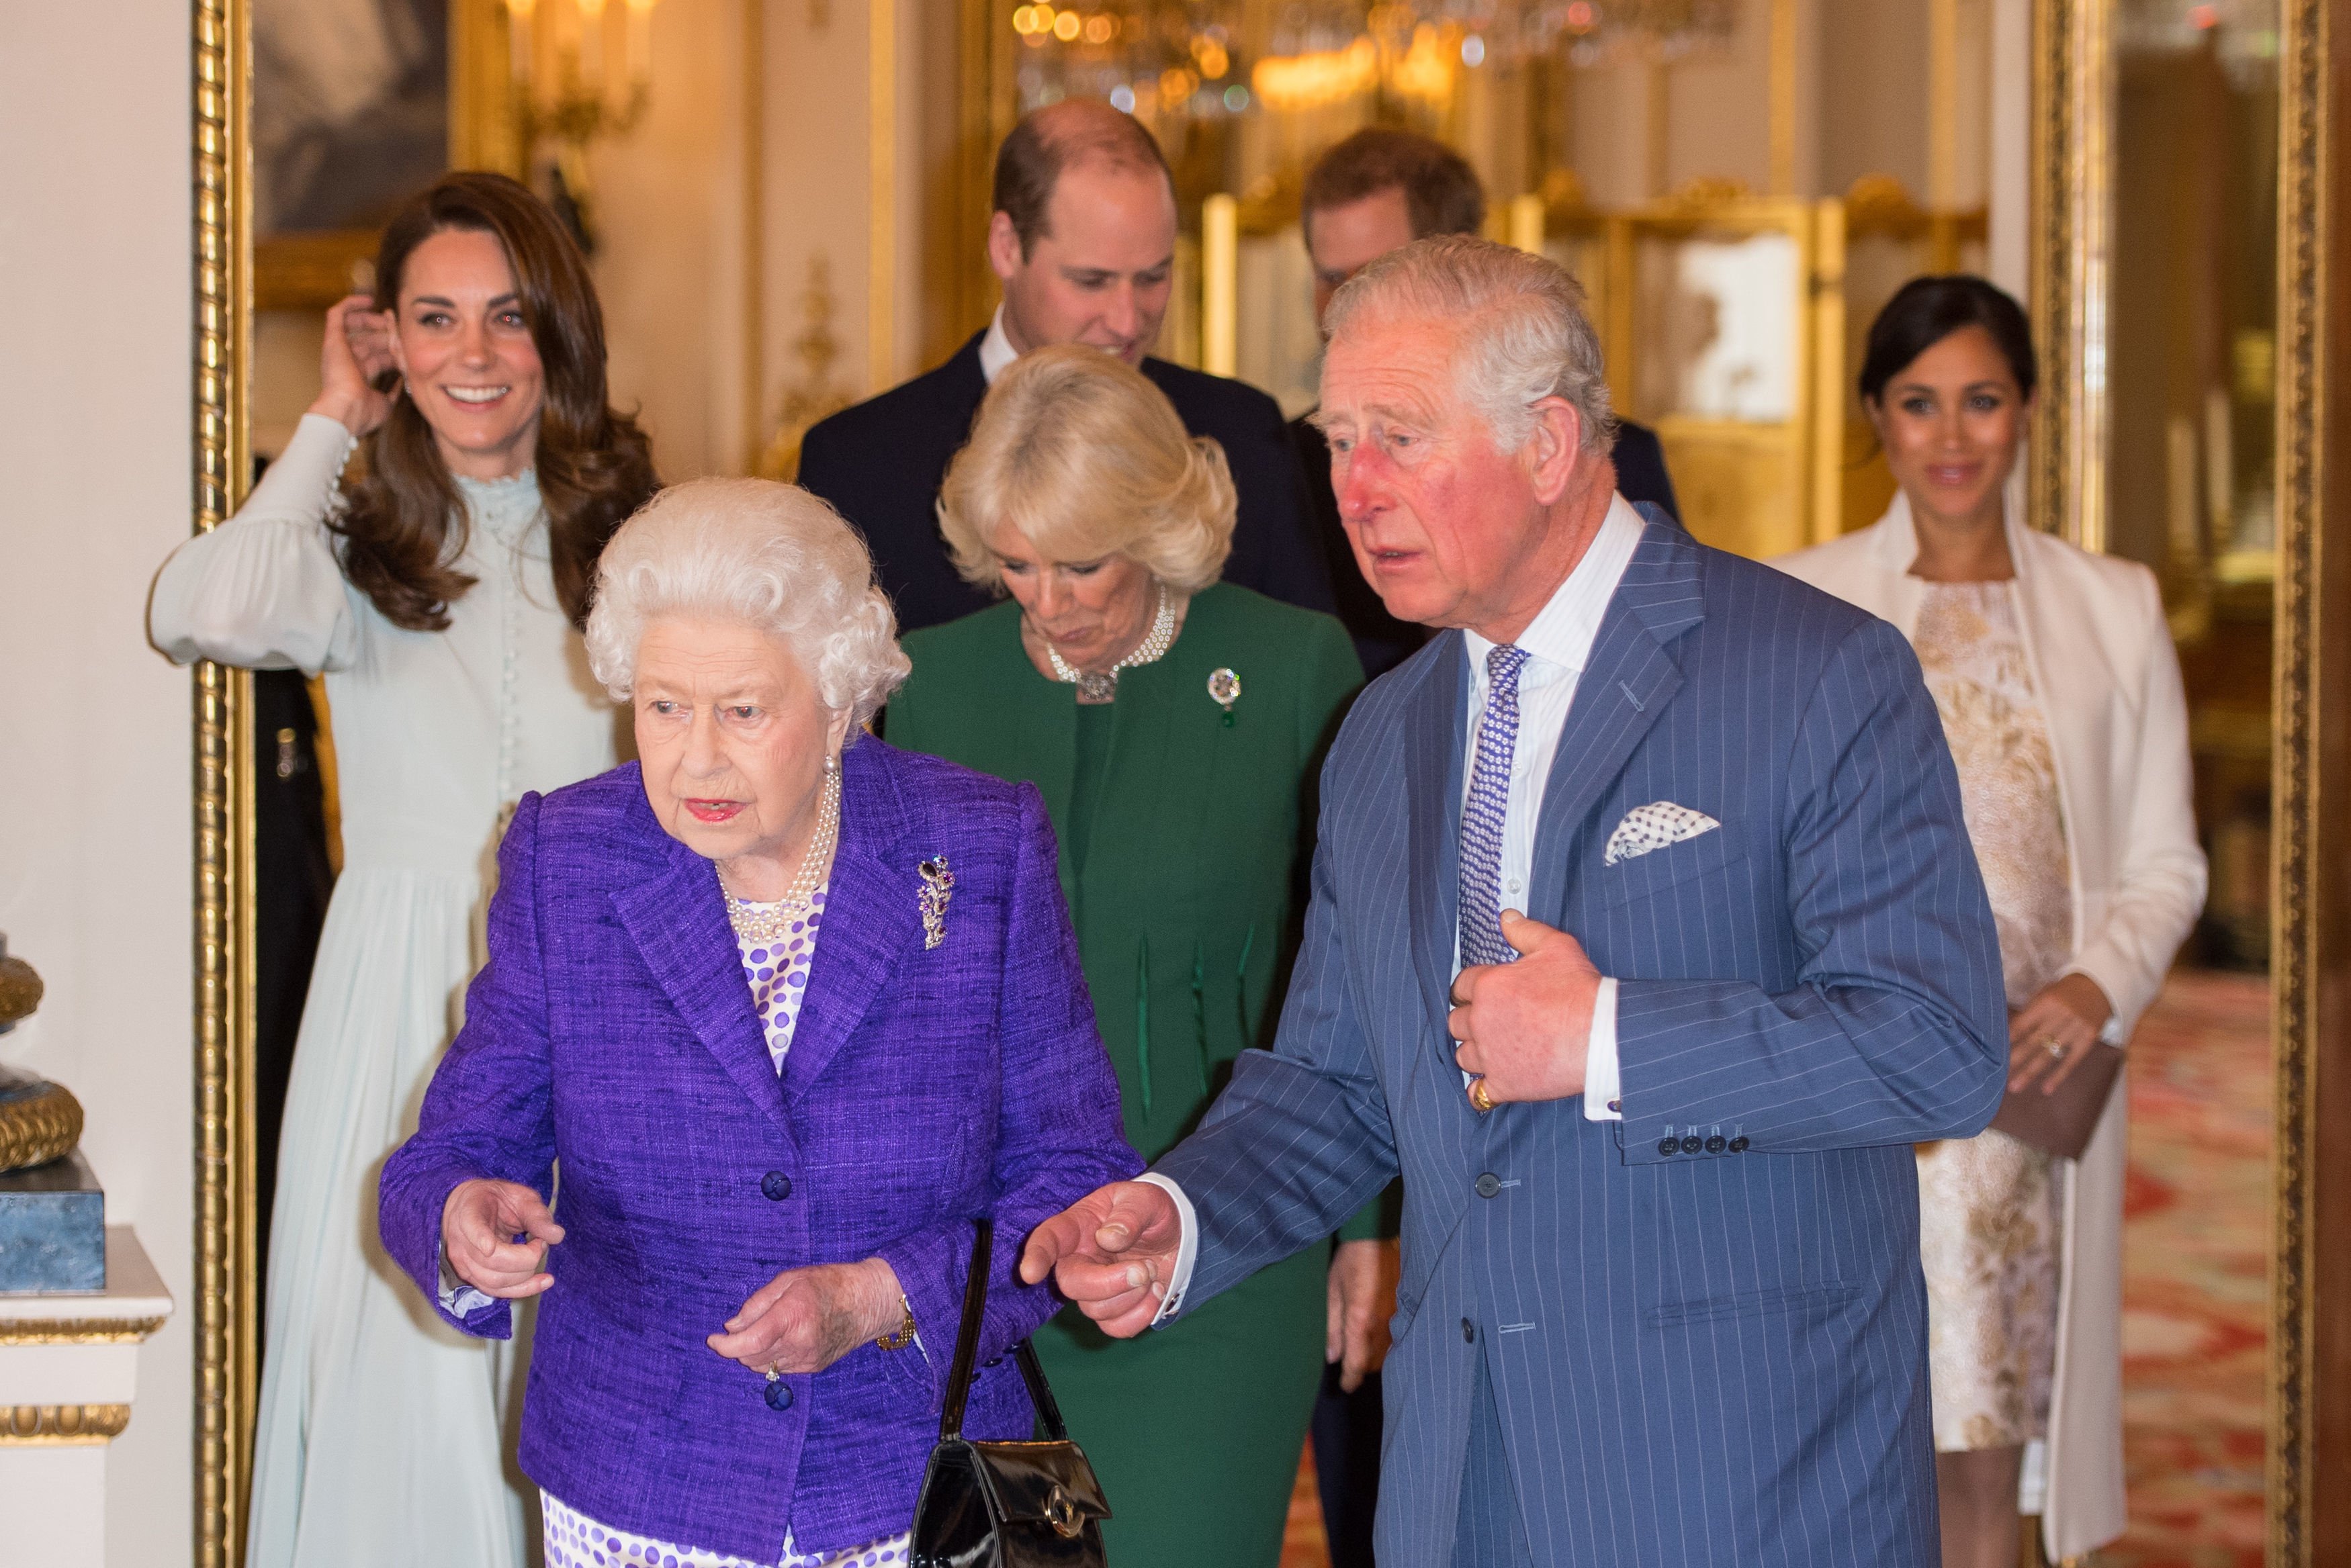 Members of the Royal Family attend a reception to mark the 50th Anniversary of the investiture of The Prince of Wales at Buckingham Palace in London on March 5, 2019 | Source: Getty Images 